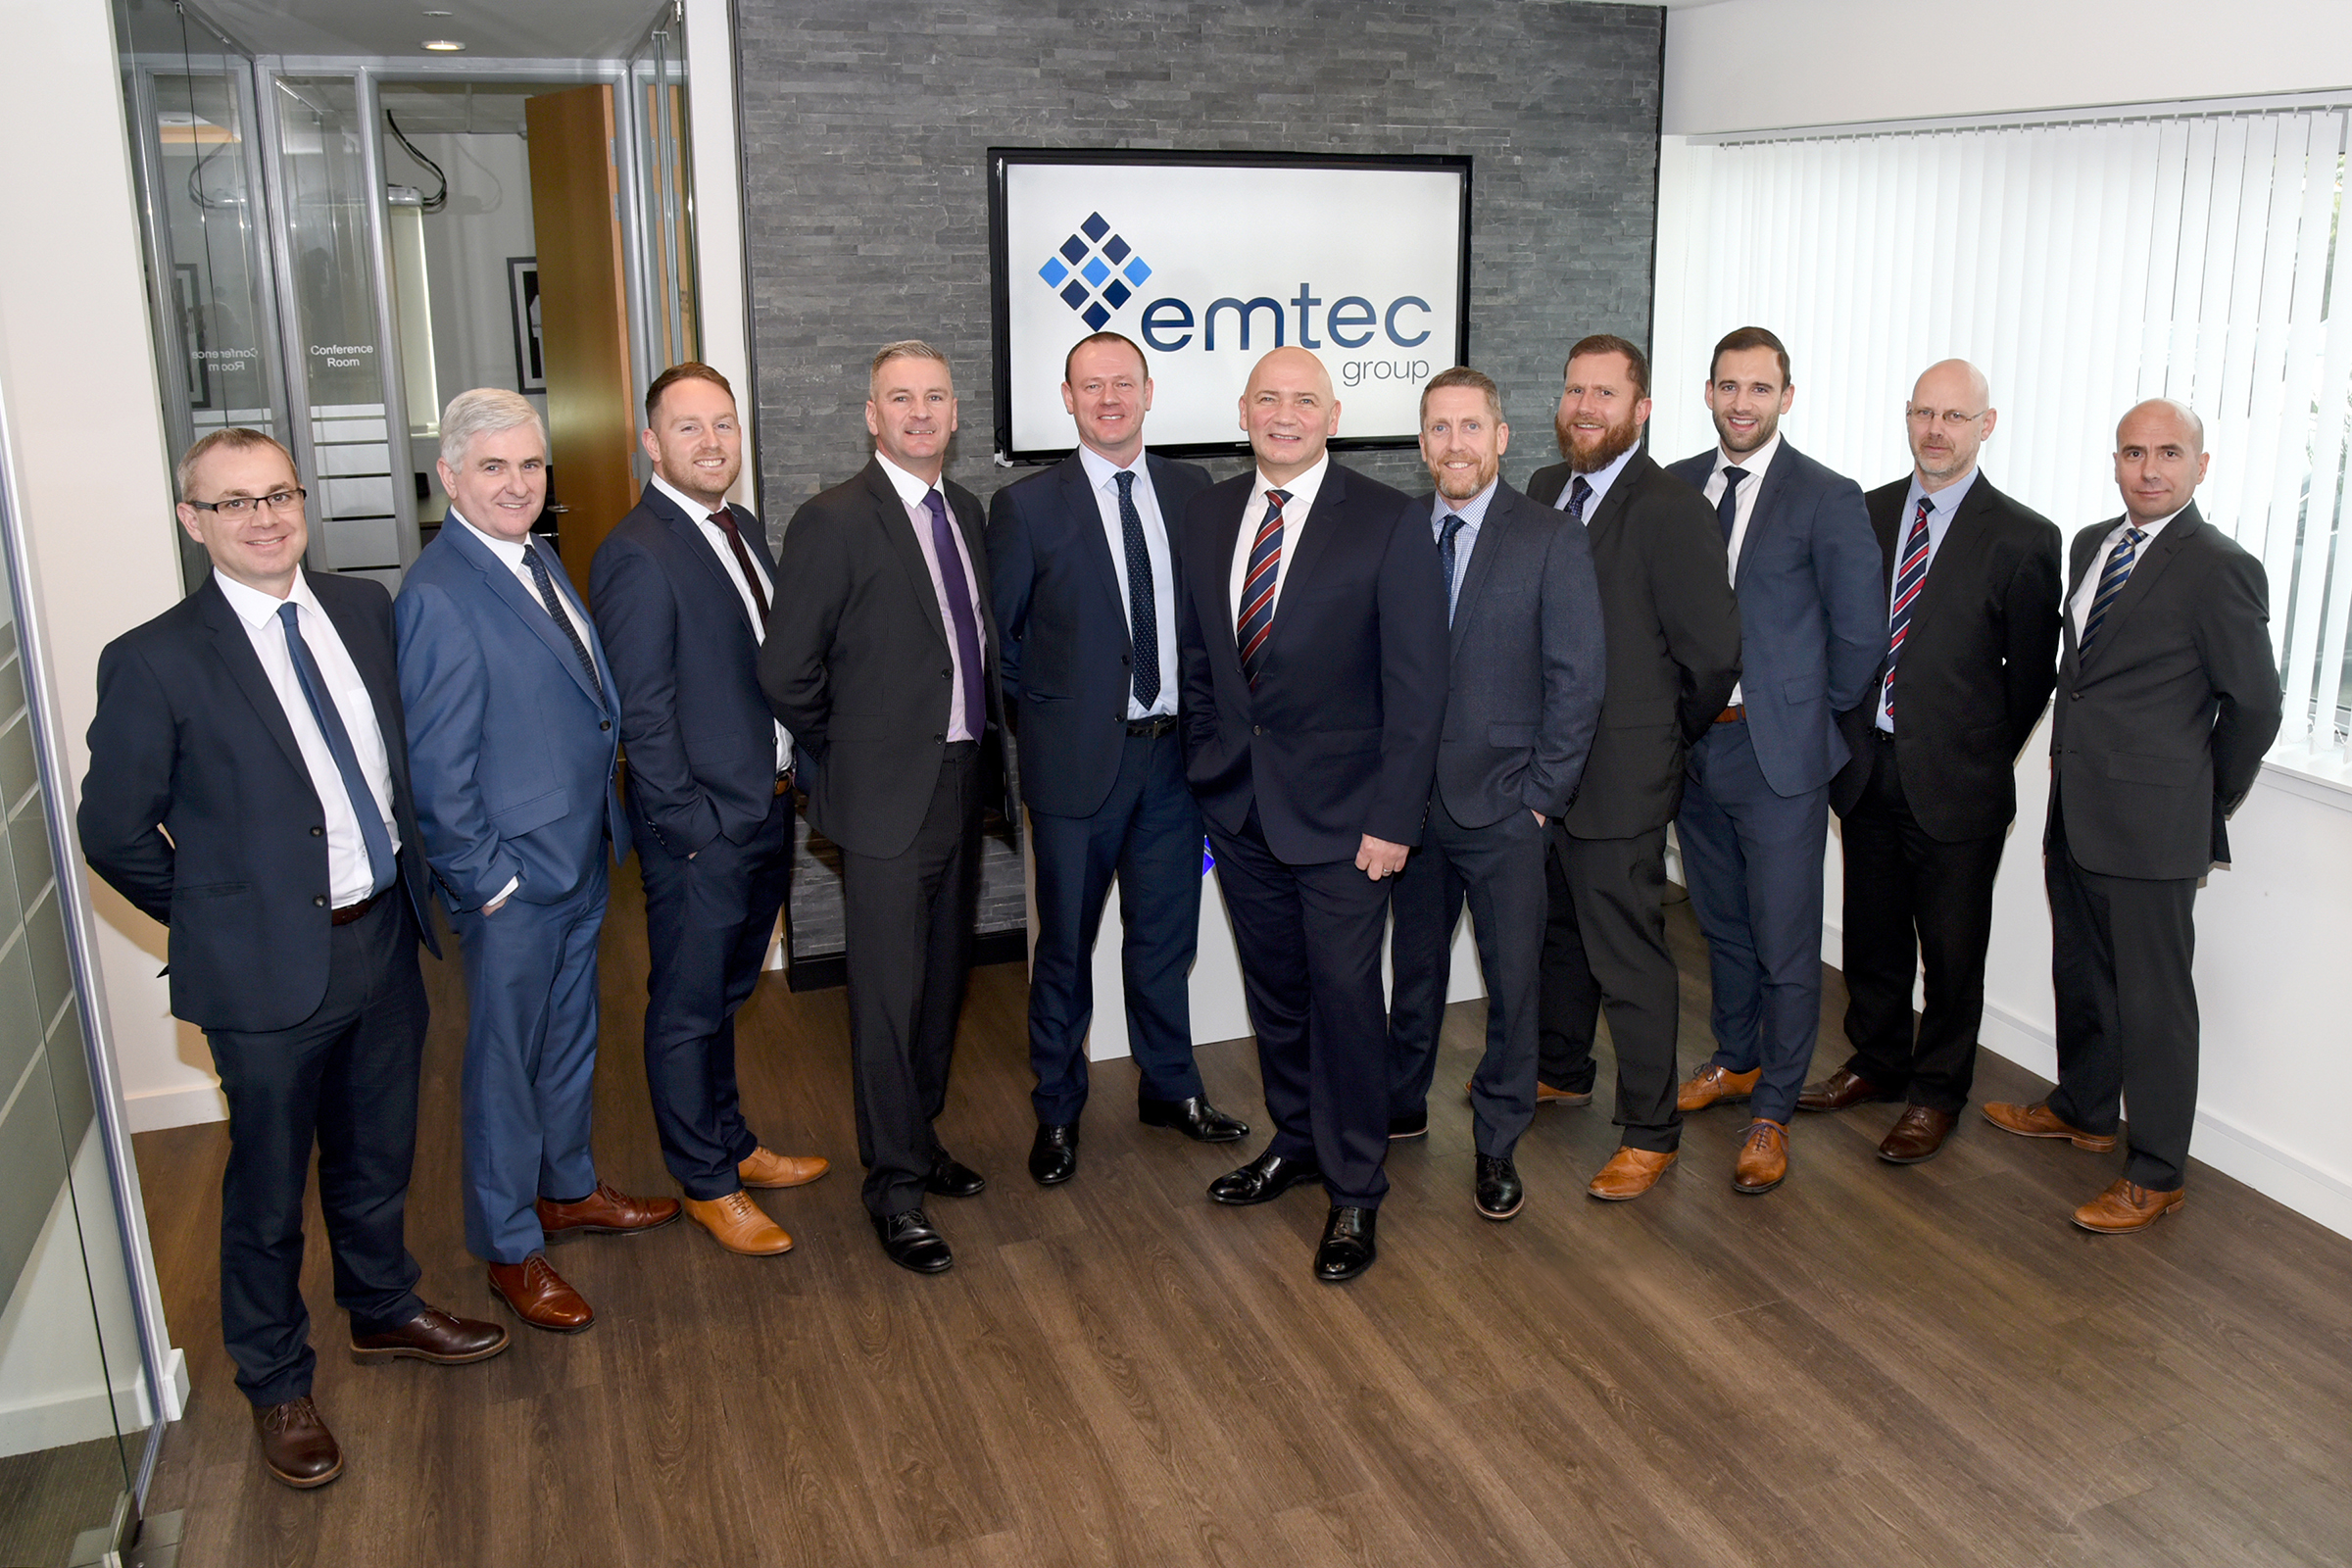 Emtec well placed for growth in Scotland and beyond